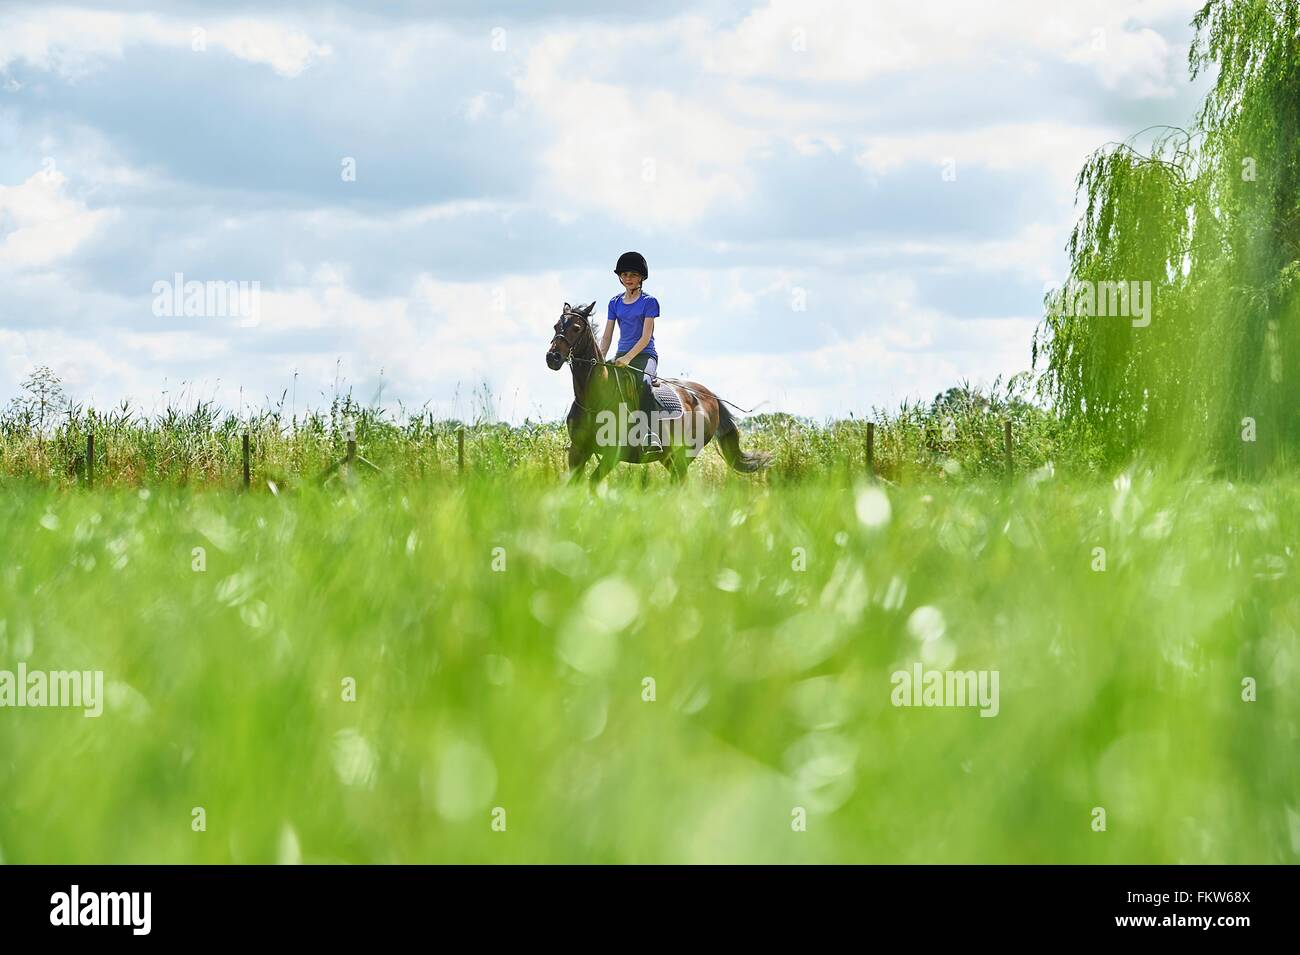 Surface level view of girl horse riding in field Stock Photo